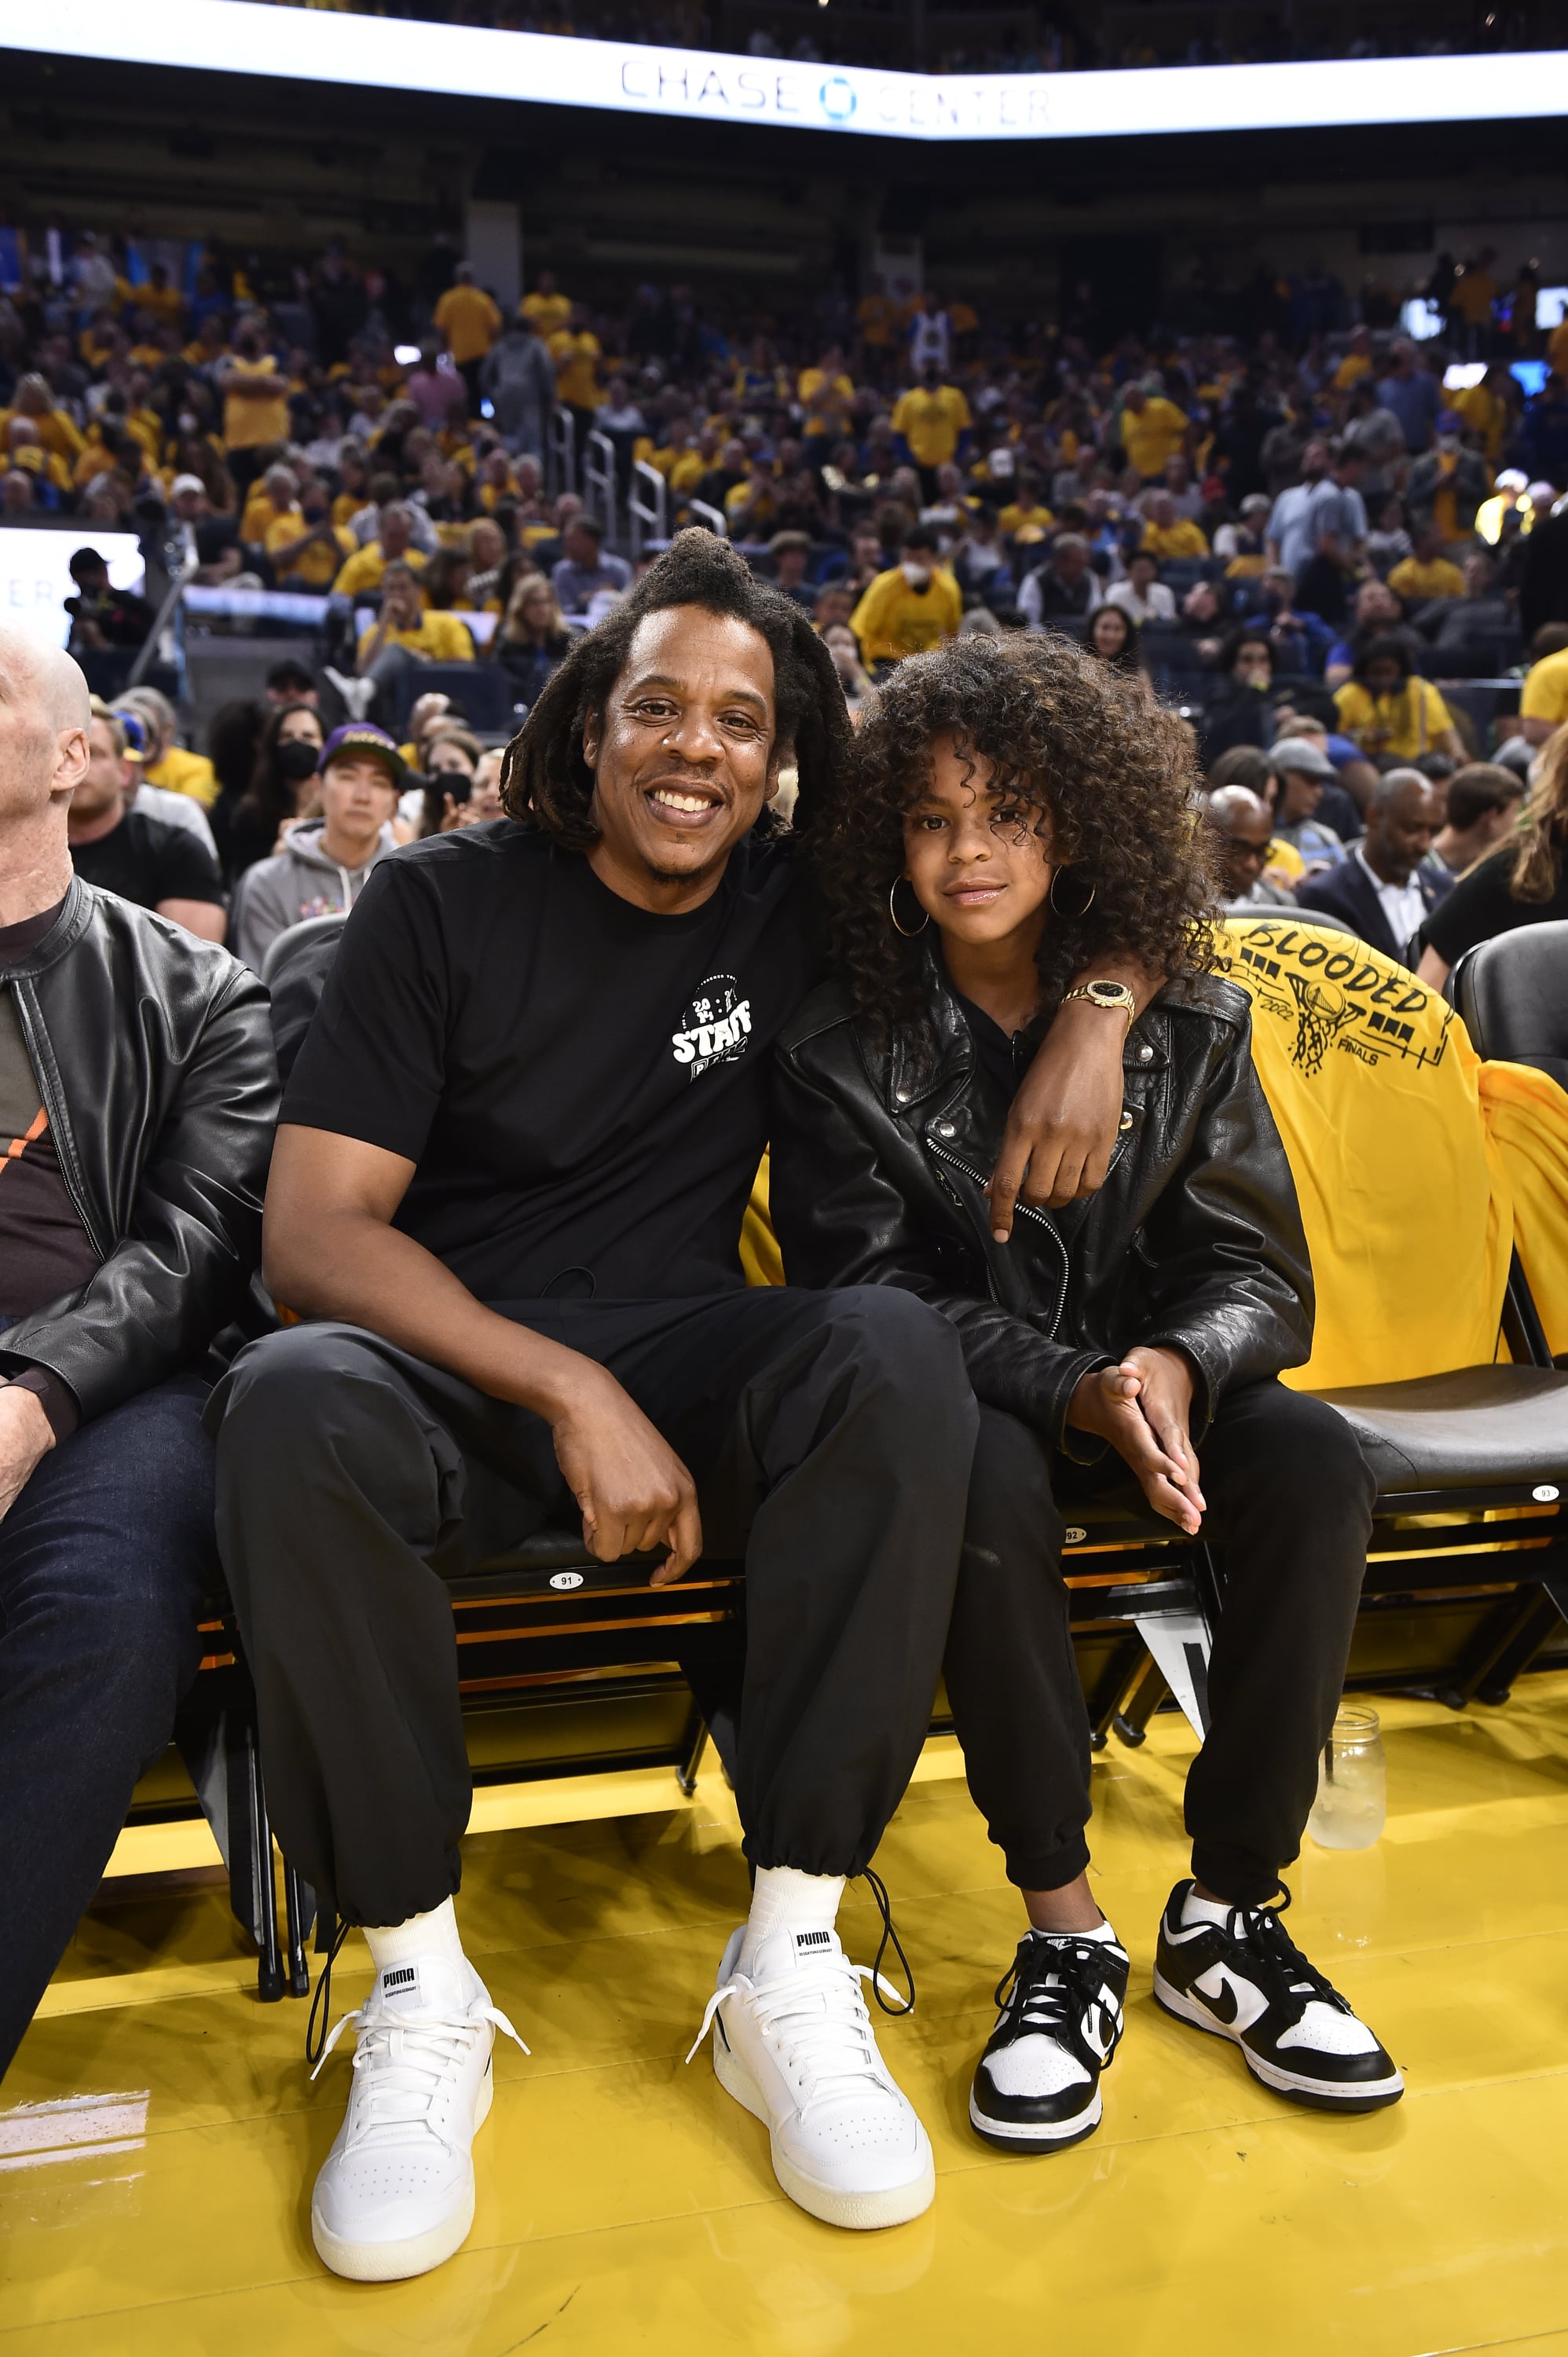 SAN FRANCISCO, CA - JUNE 13: Jay-Z and his daughter Blue Ivy Carter poses for a photo during the game of the Boston Celtics against the Golden State Warriors during Game Five of the 2022 NBA Finals on June 13, 2022 at Chase Center in San Francisco, California. NOTE TO USER: User expressly acknowledges and agrees that, by downloading and or using this photograph, user is consenting to the terms and conditions of Getty Images License Agreement. Mandatory Copyright Notice: Copyright 2022 NBAE (Photo by David Dow/NBAE via Getty Images)